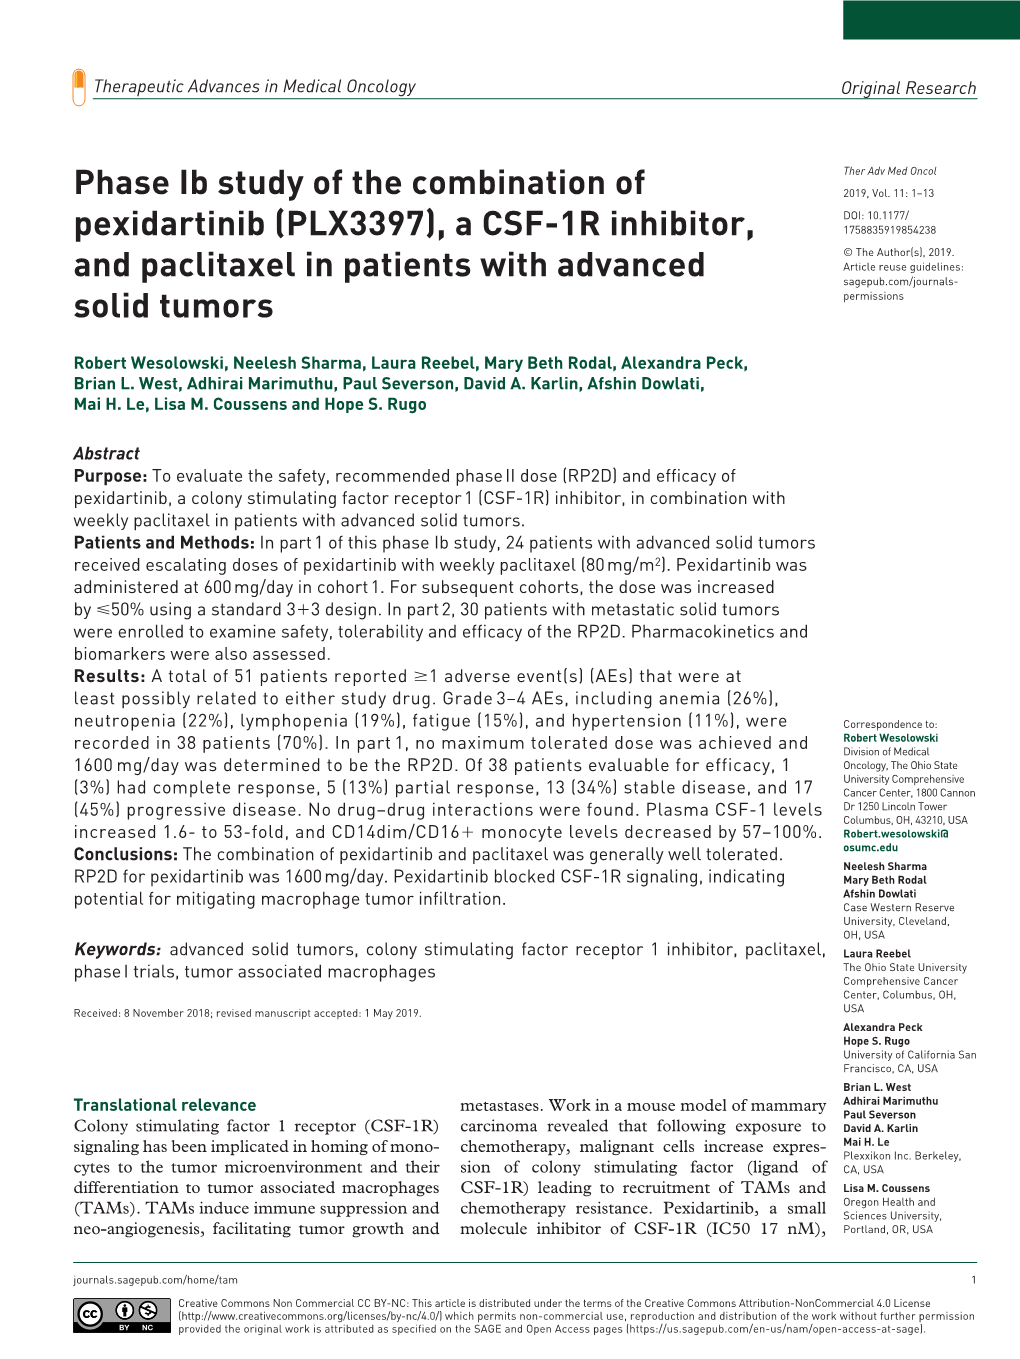 Phase Ib Study of the Combination of Pexidartinib (PLX3397), a CSF-1R Inhibitor, and Paclitaxel in Patients with Advanced Solid